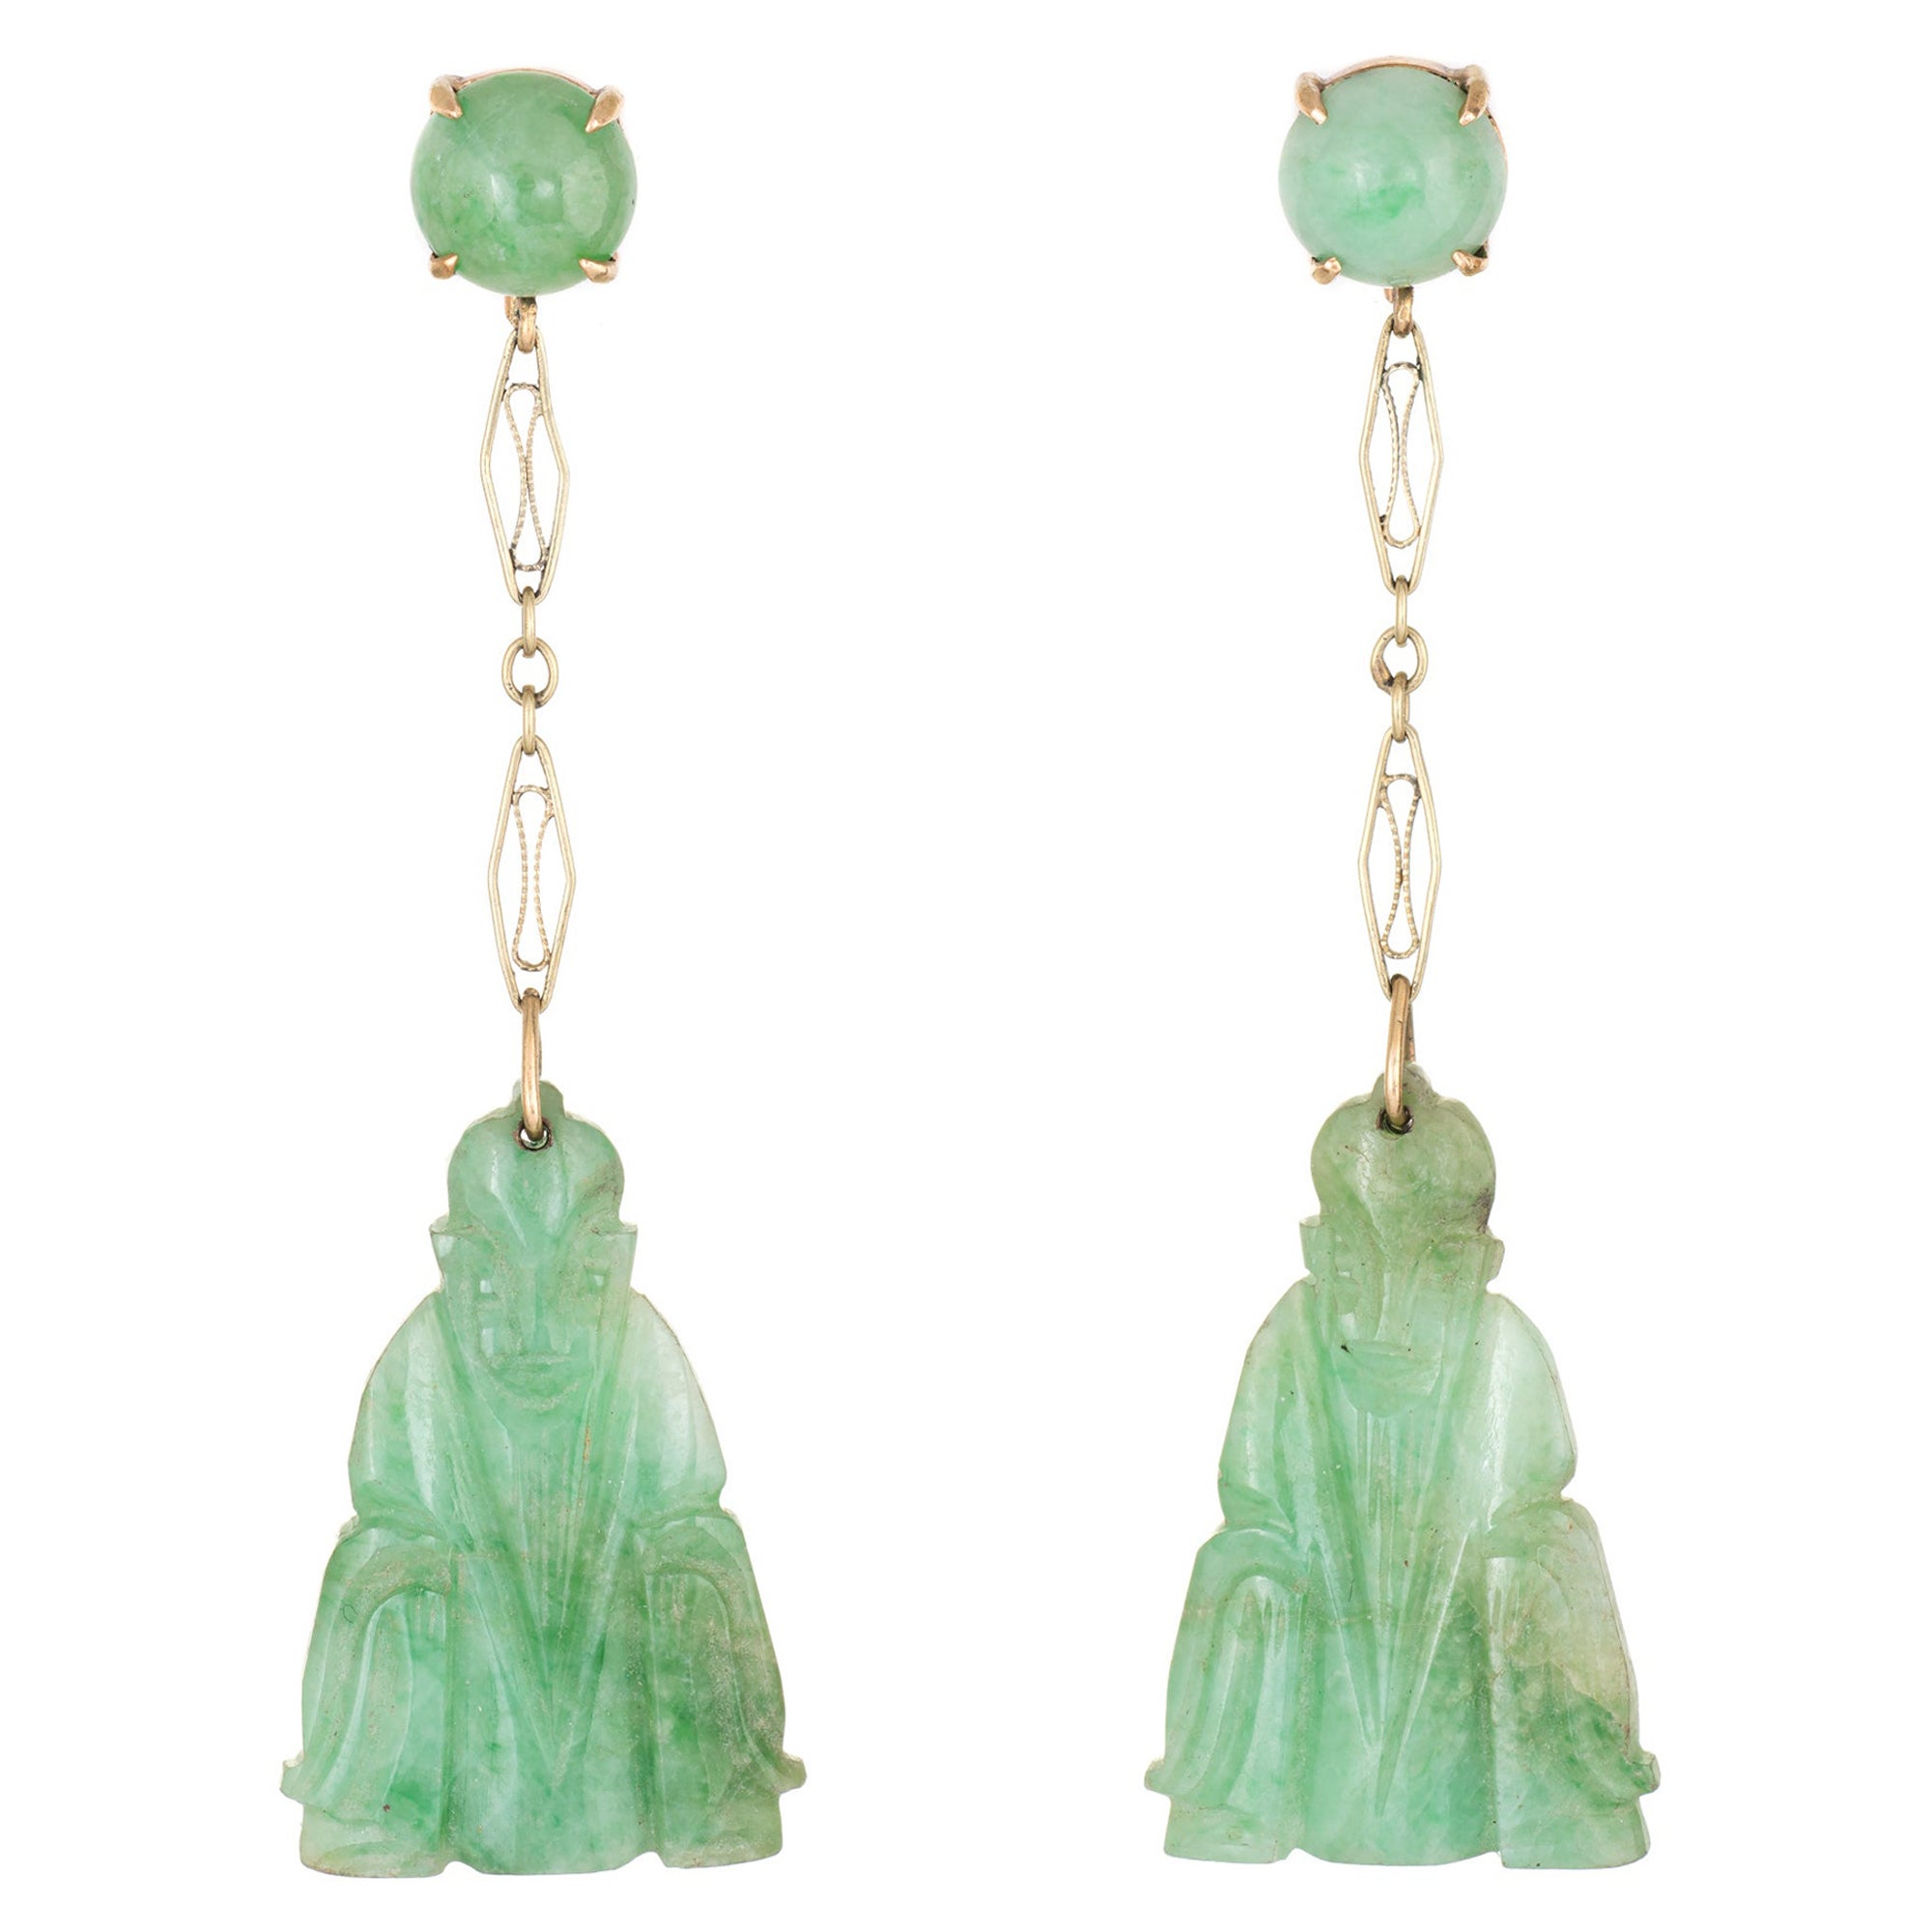 Carved Jade Buddha Earrings Vintage 14k Yellow Gold Dangle Estate Jewelry